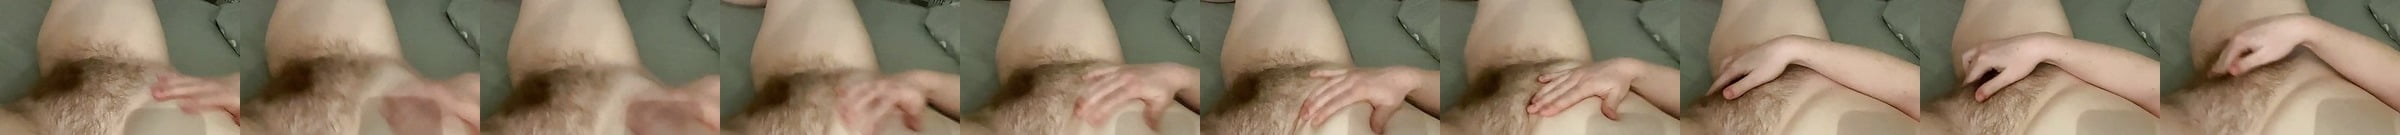 Fucking My Pussy With A Carrot Free Sexest HD Porn 0b XHamster